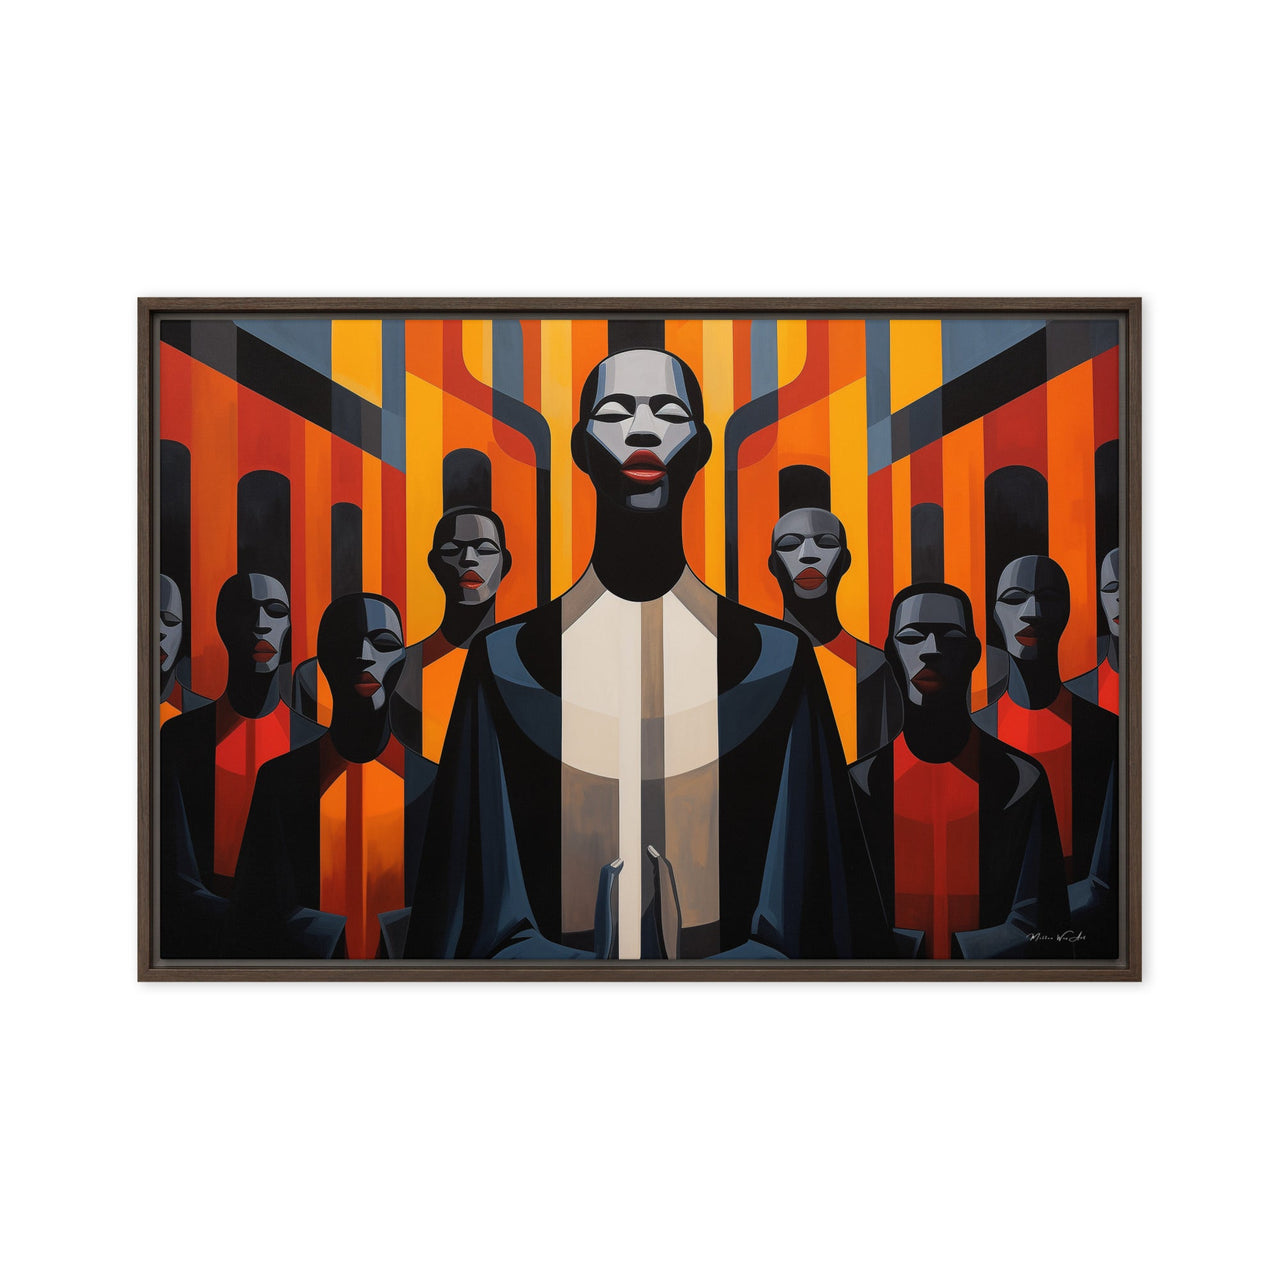 Dynamic framed canvas print from Milton Wes Art featuring a central figure surrounded by silhouetted characters against a patterned backdrop, a striking piece from the Harlem-based retailer miltonwesart.com